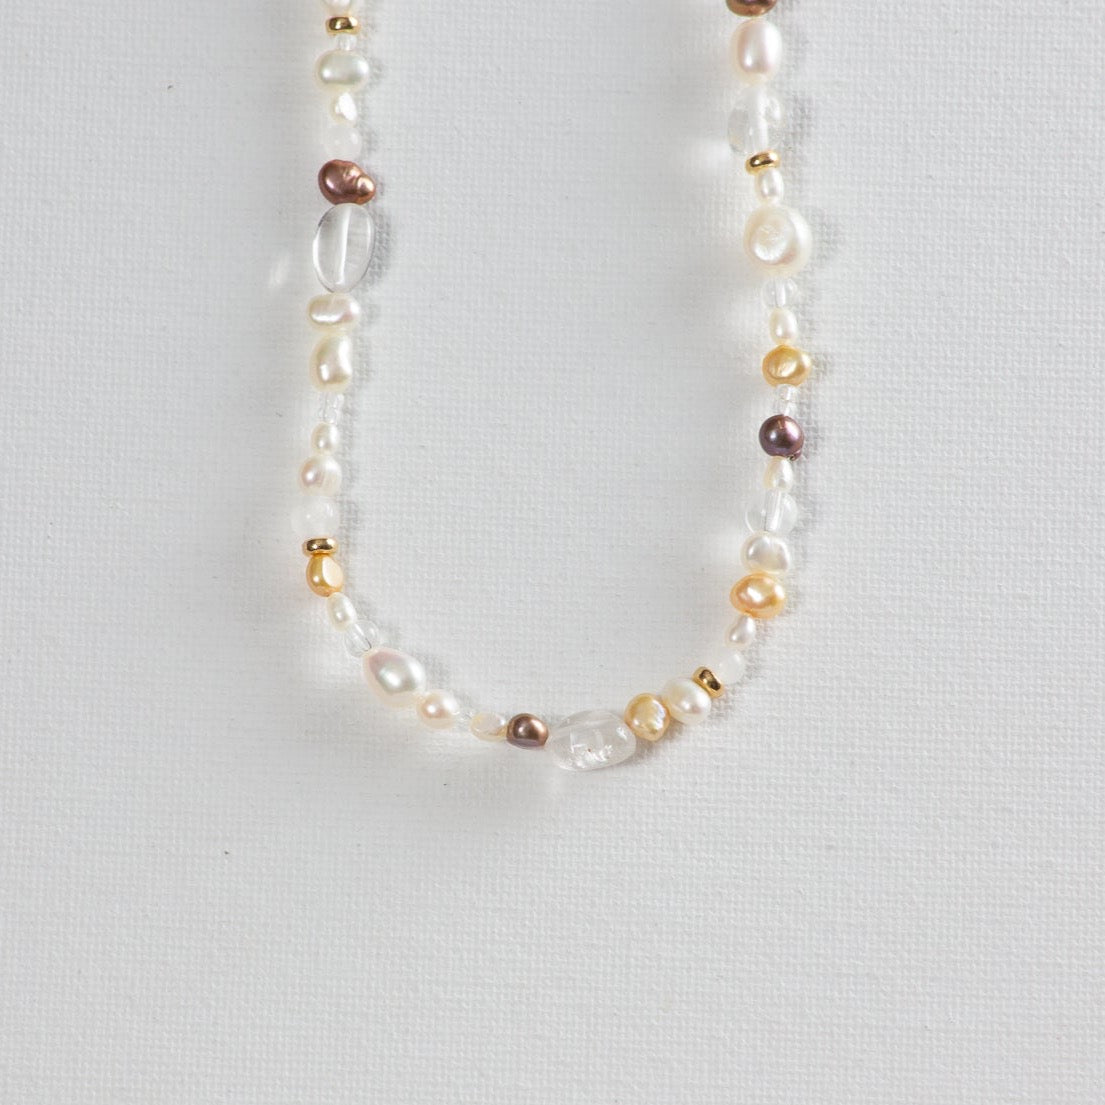 Nova necklace on a white background. In the photo, you can see the combination of peach, cream, and purple colored pearls alternating between clear glass beads and dainty gold beads.